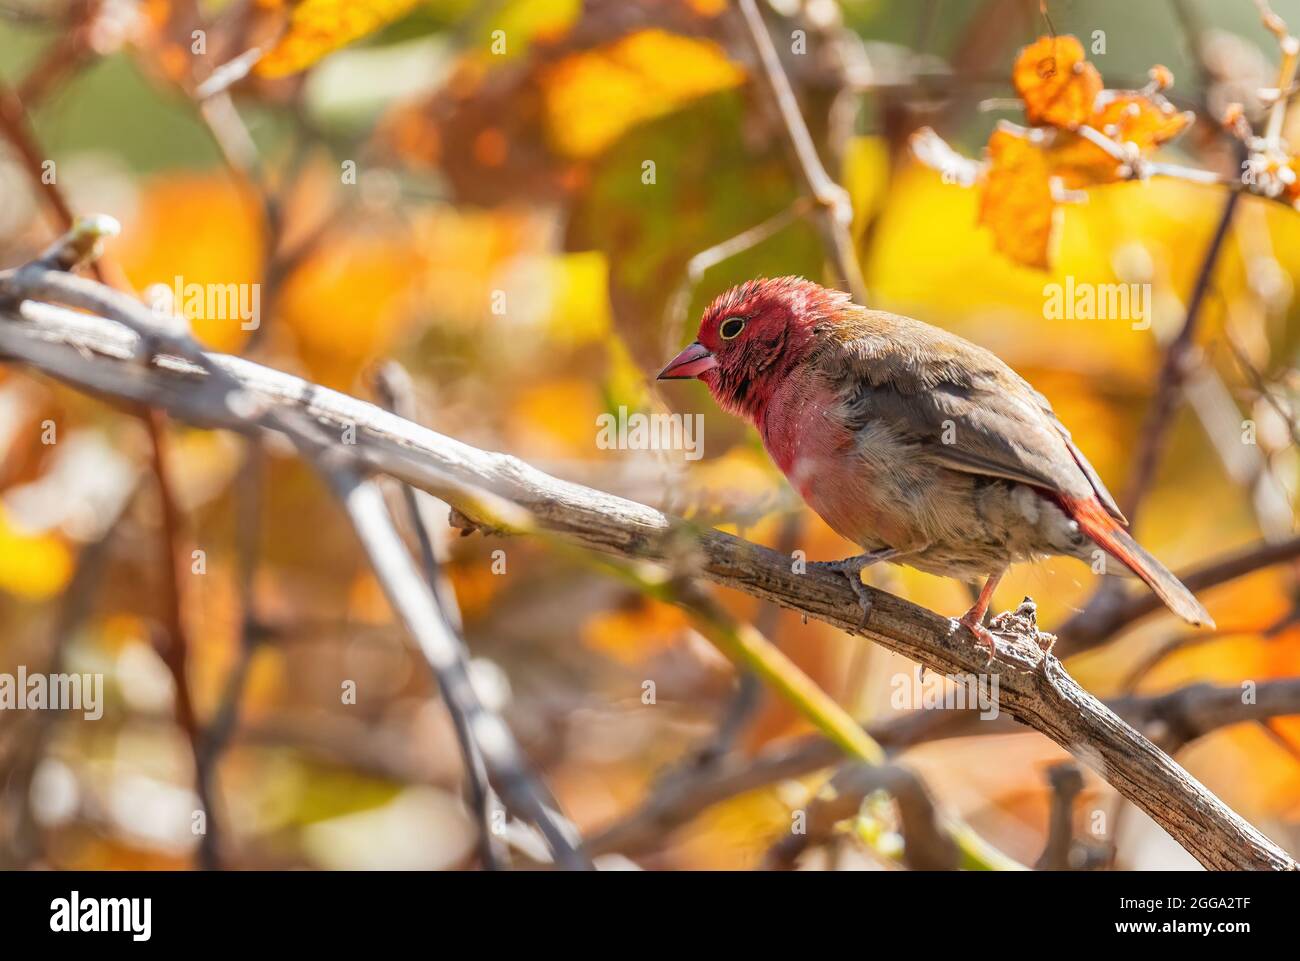 Red-billed Firefinch - Lagonosticta senegala, beautiful small red perching bird from African bushes and gardens, Ethiopia. Stock Photo